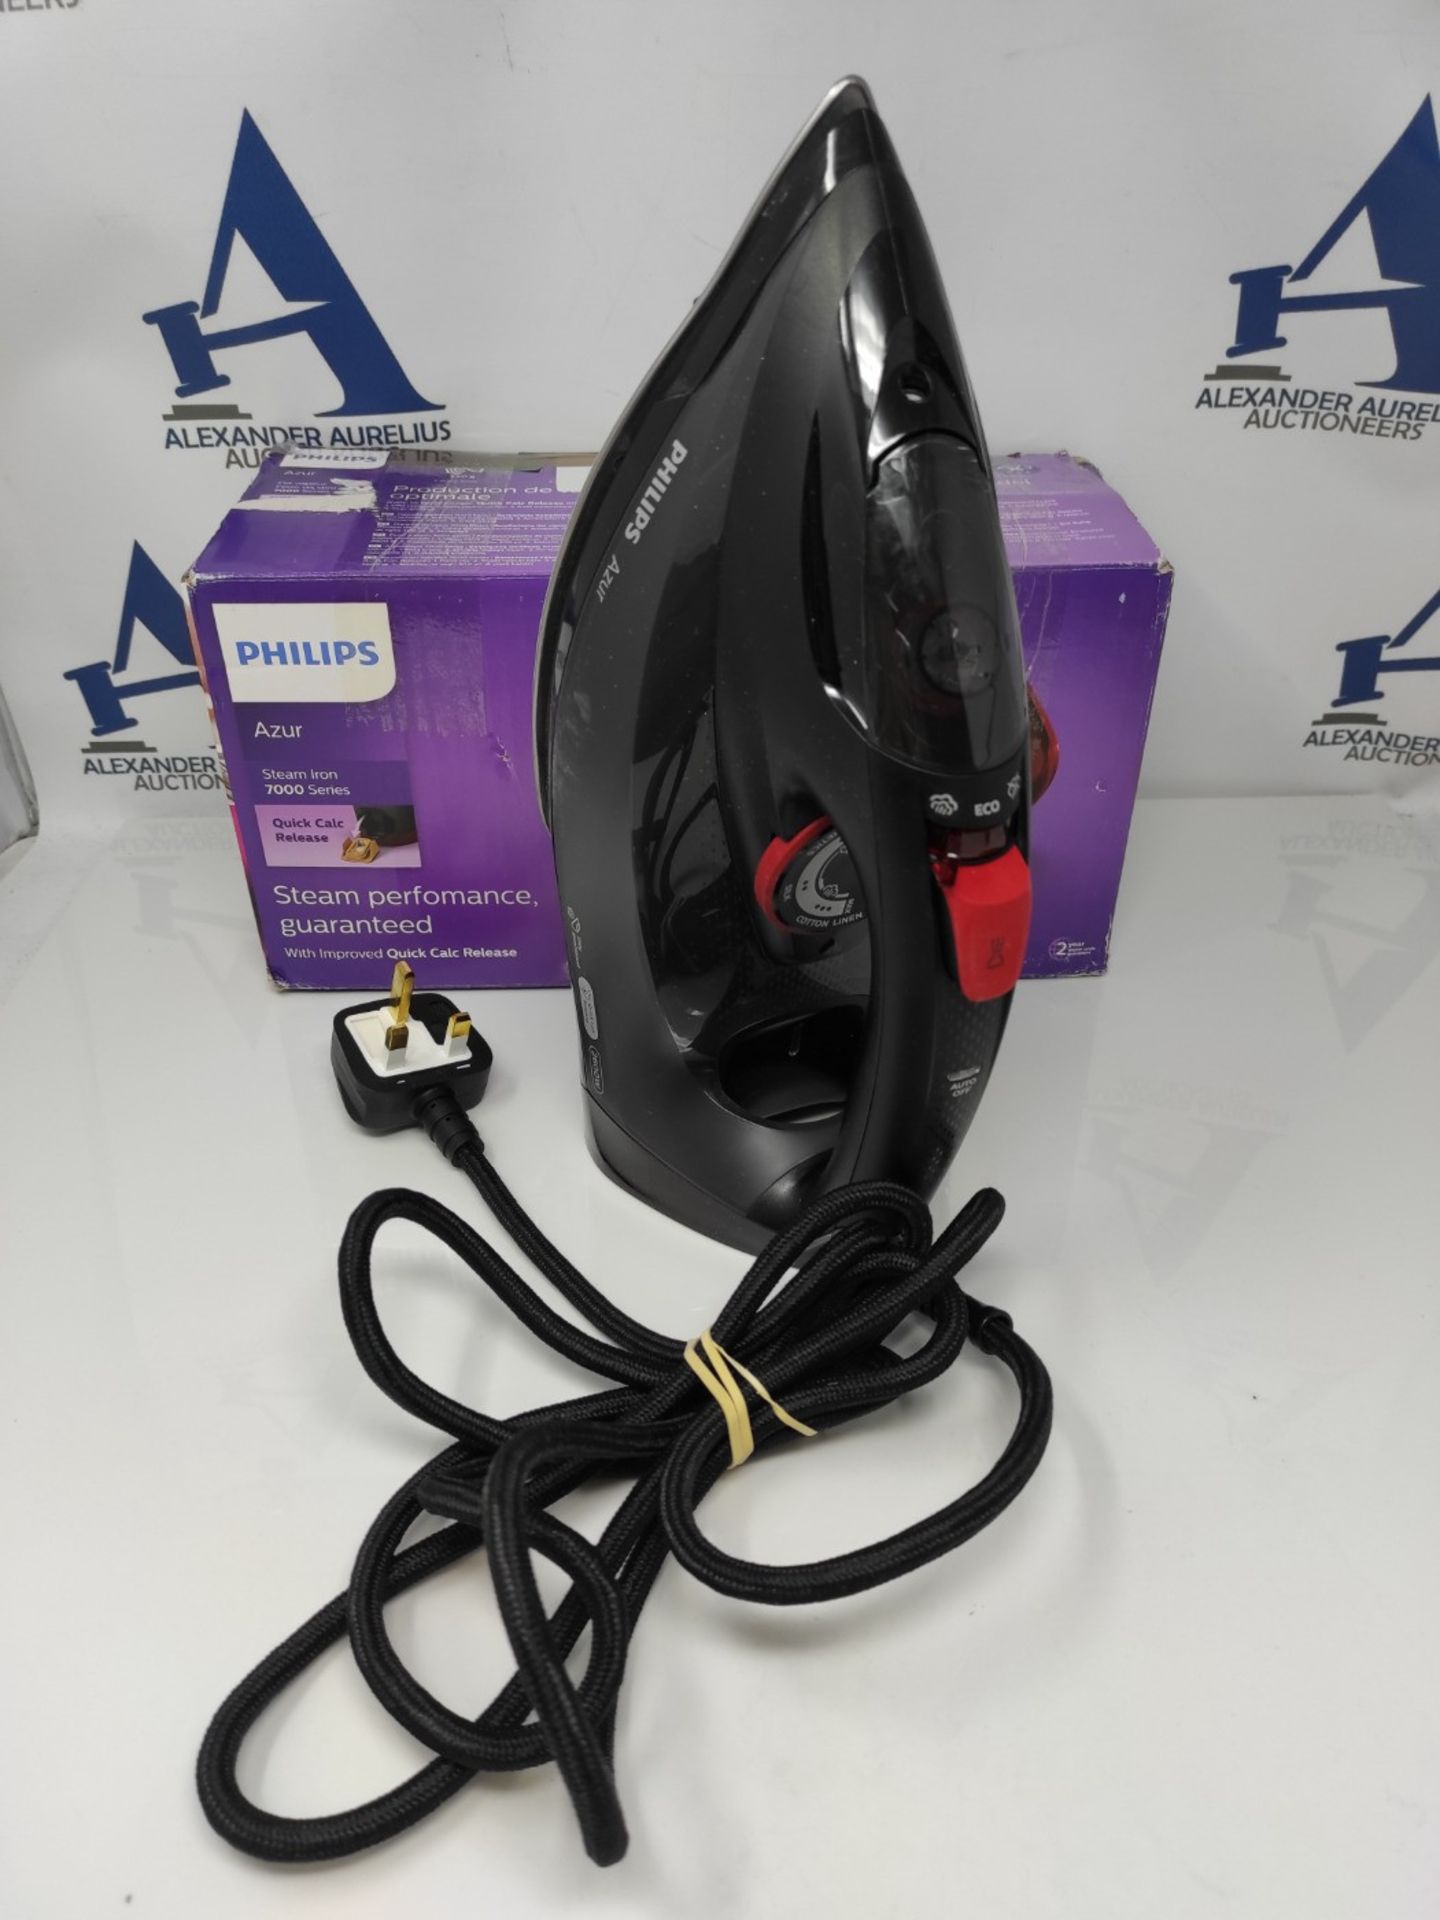 RRP £54.00 Philips Azur Steam Iron - 250 g Steam Boost - 2600 W - With SteamGlide Soleplate - 2.5 - Image 2 of 2